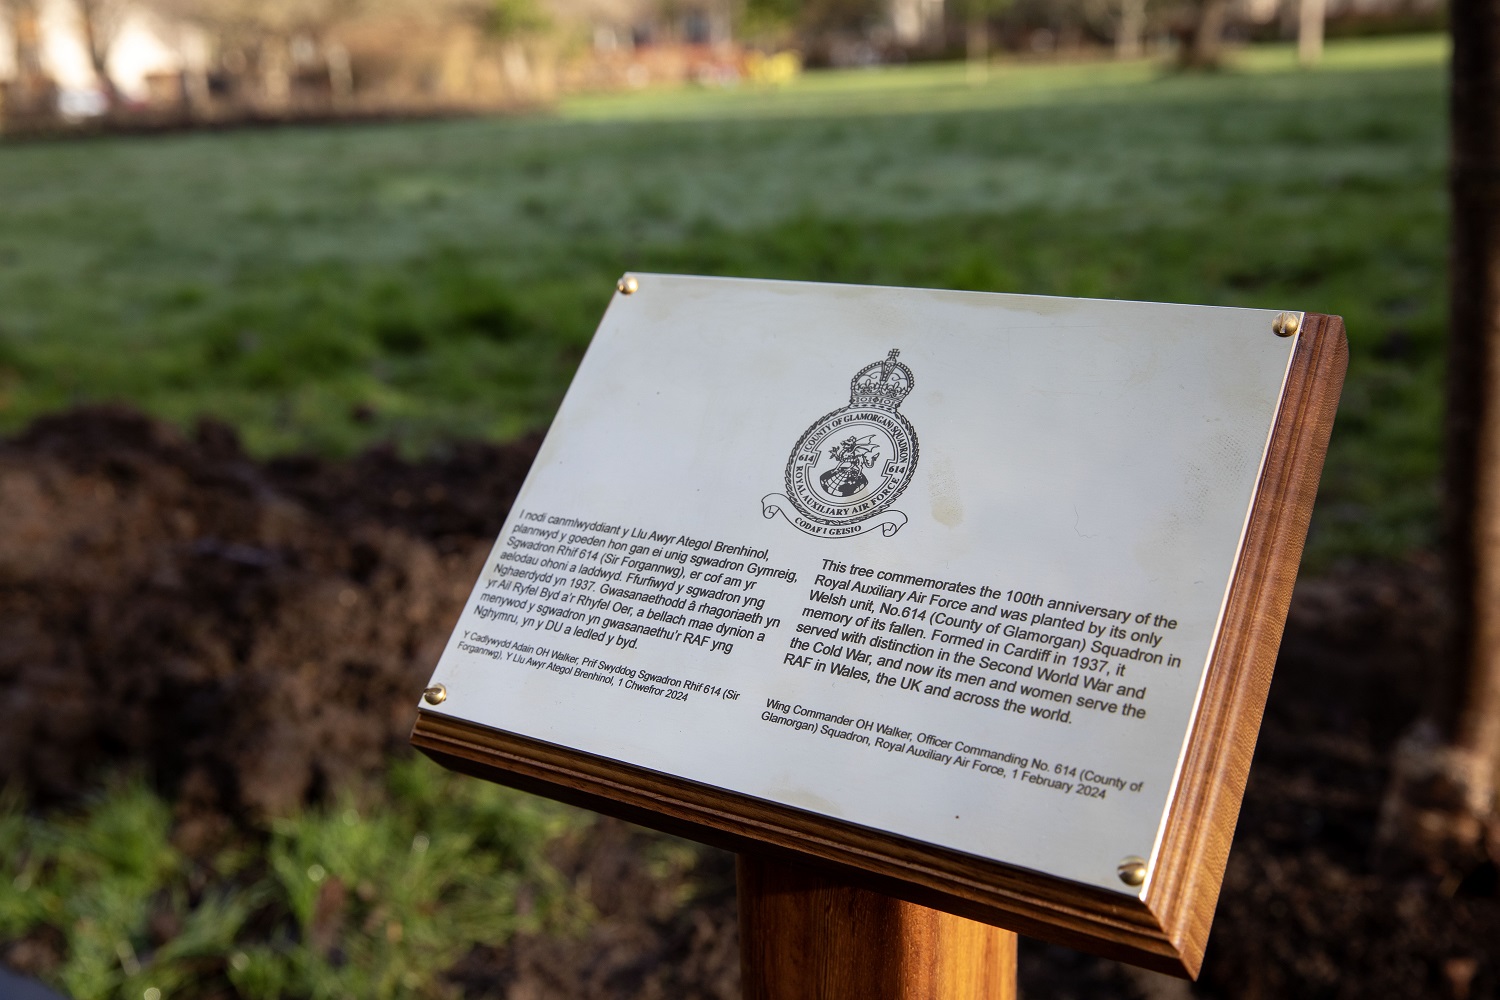 Photo: The plaque for the memorial tree.